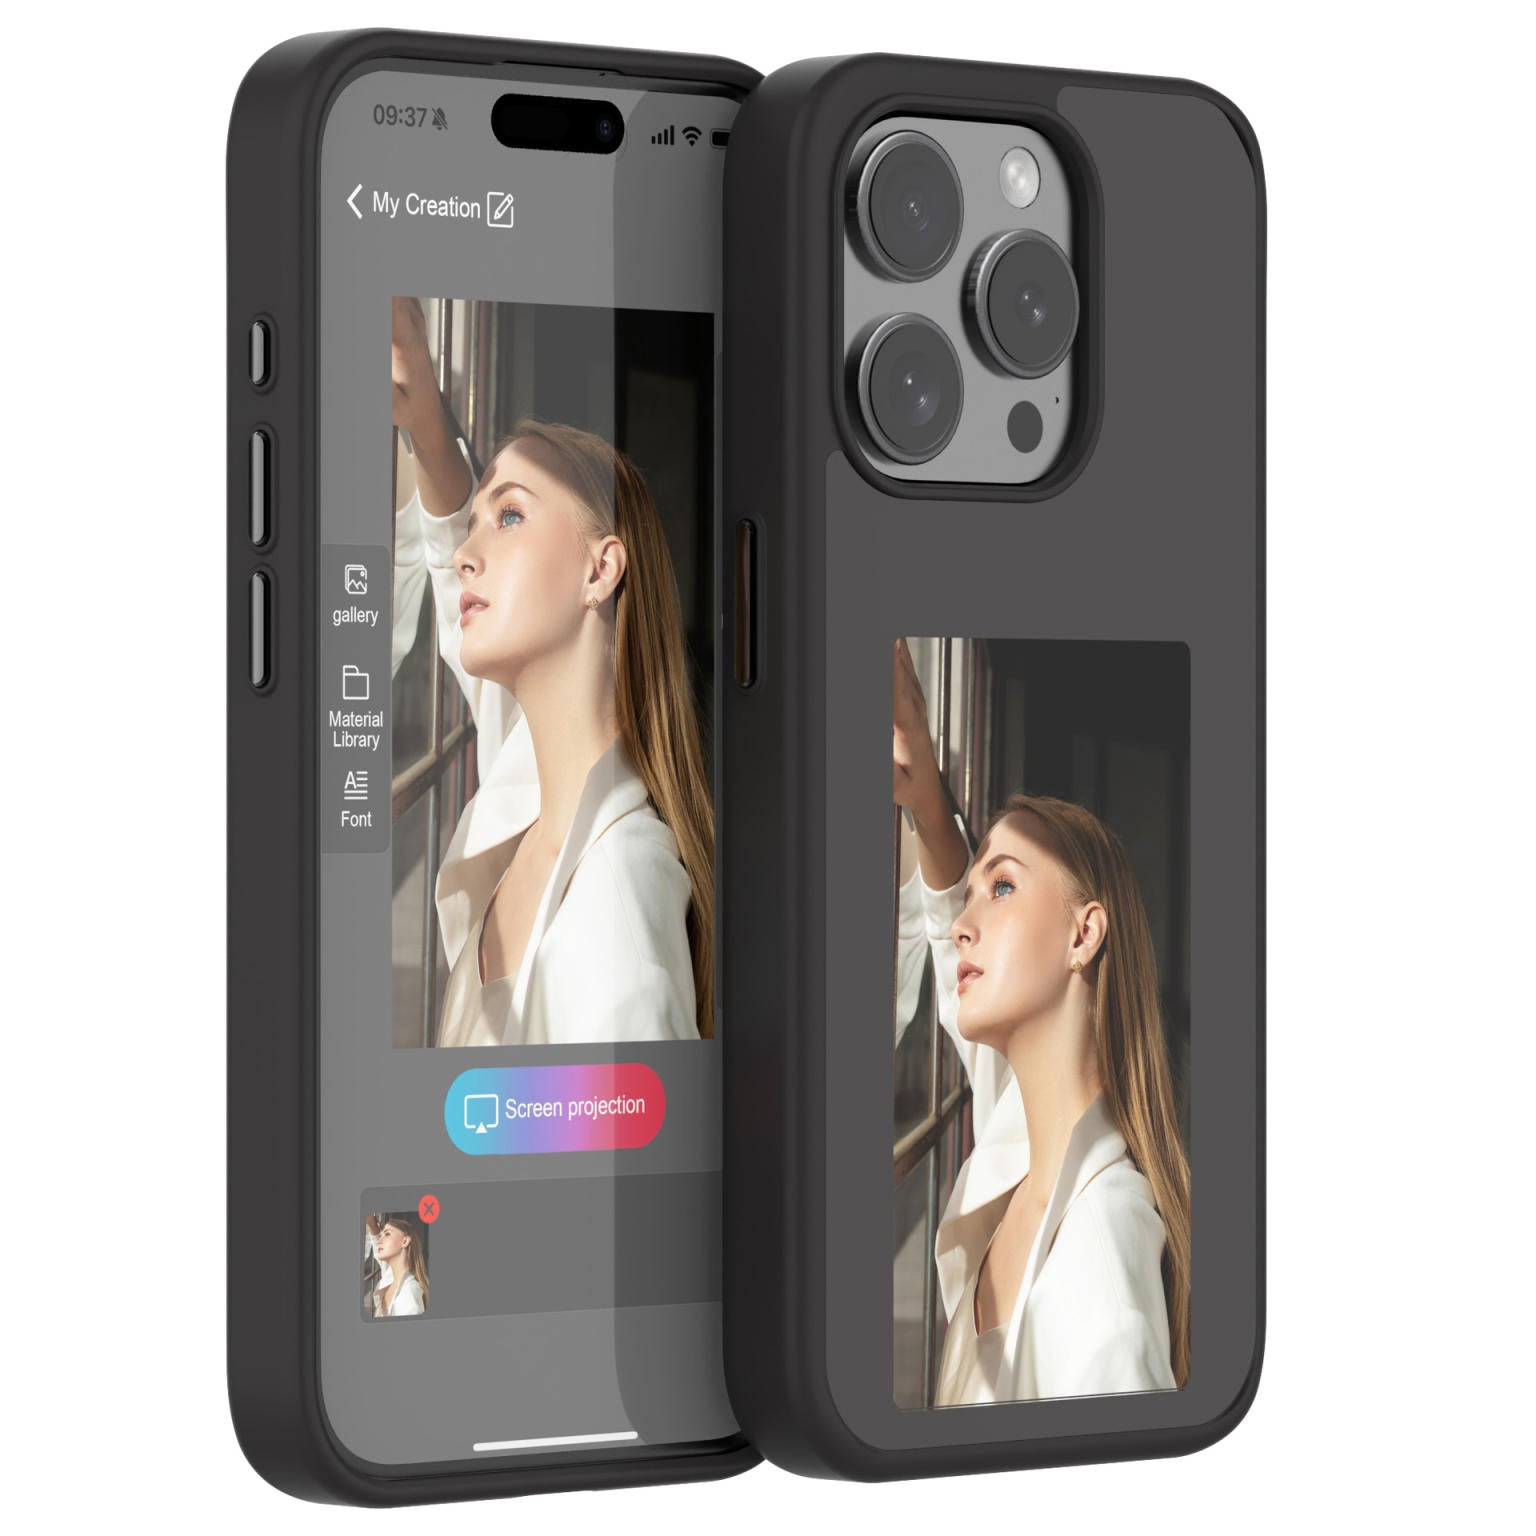 PhotoInk™ Case - The Original E-Ink Case For IPhone